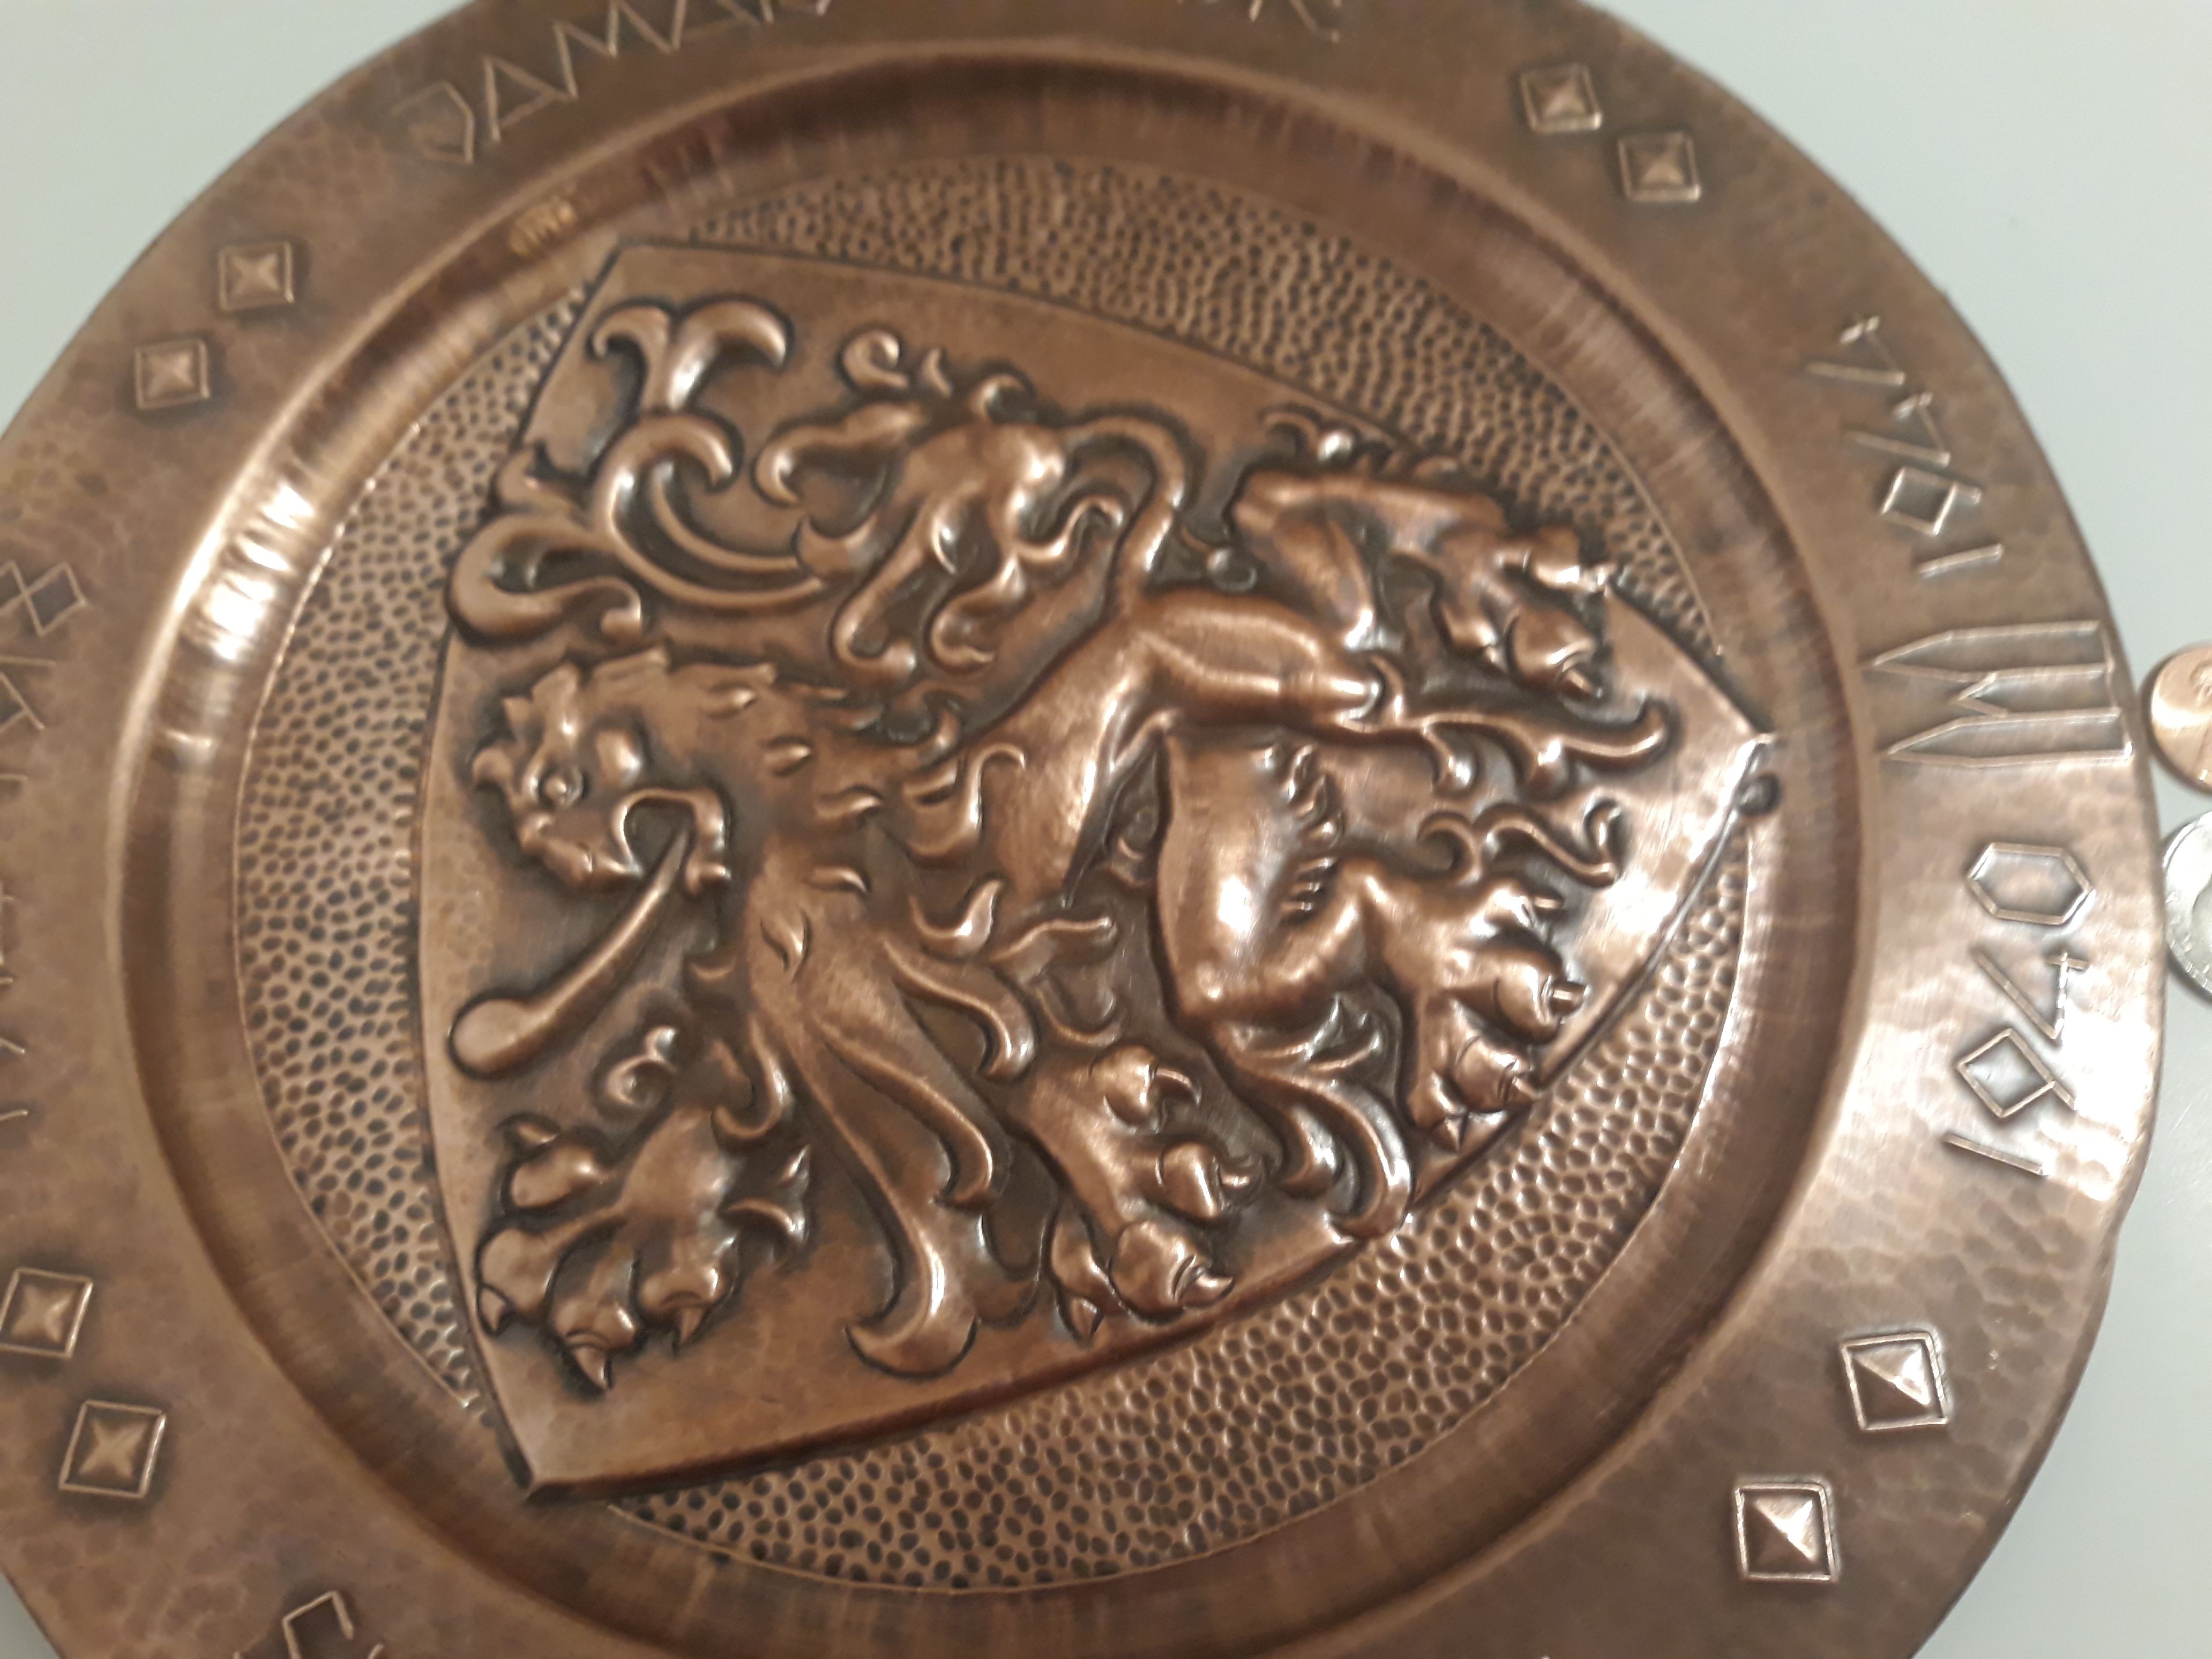 Vintage Metal Copper Wall Hanging Plate, 10" Wide, Lion, Home Decor, Wall Decor, Shelf Display, This Can Be Shined Up Even More